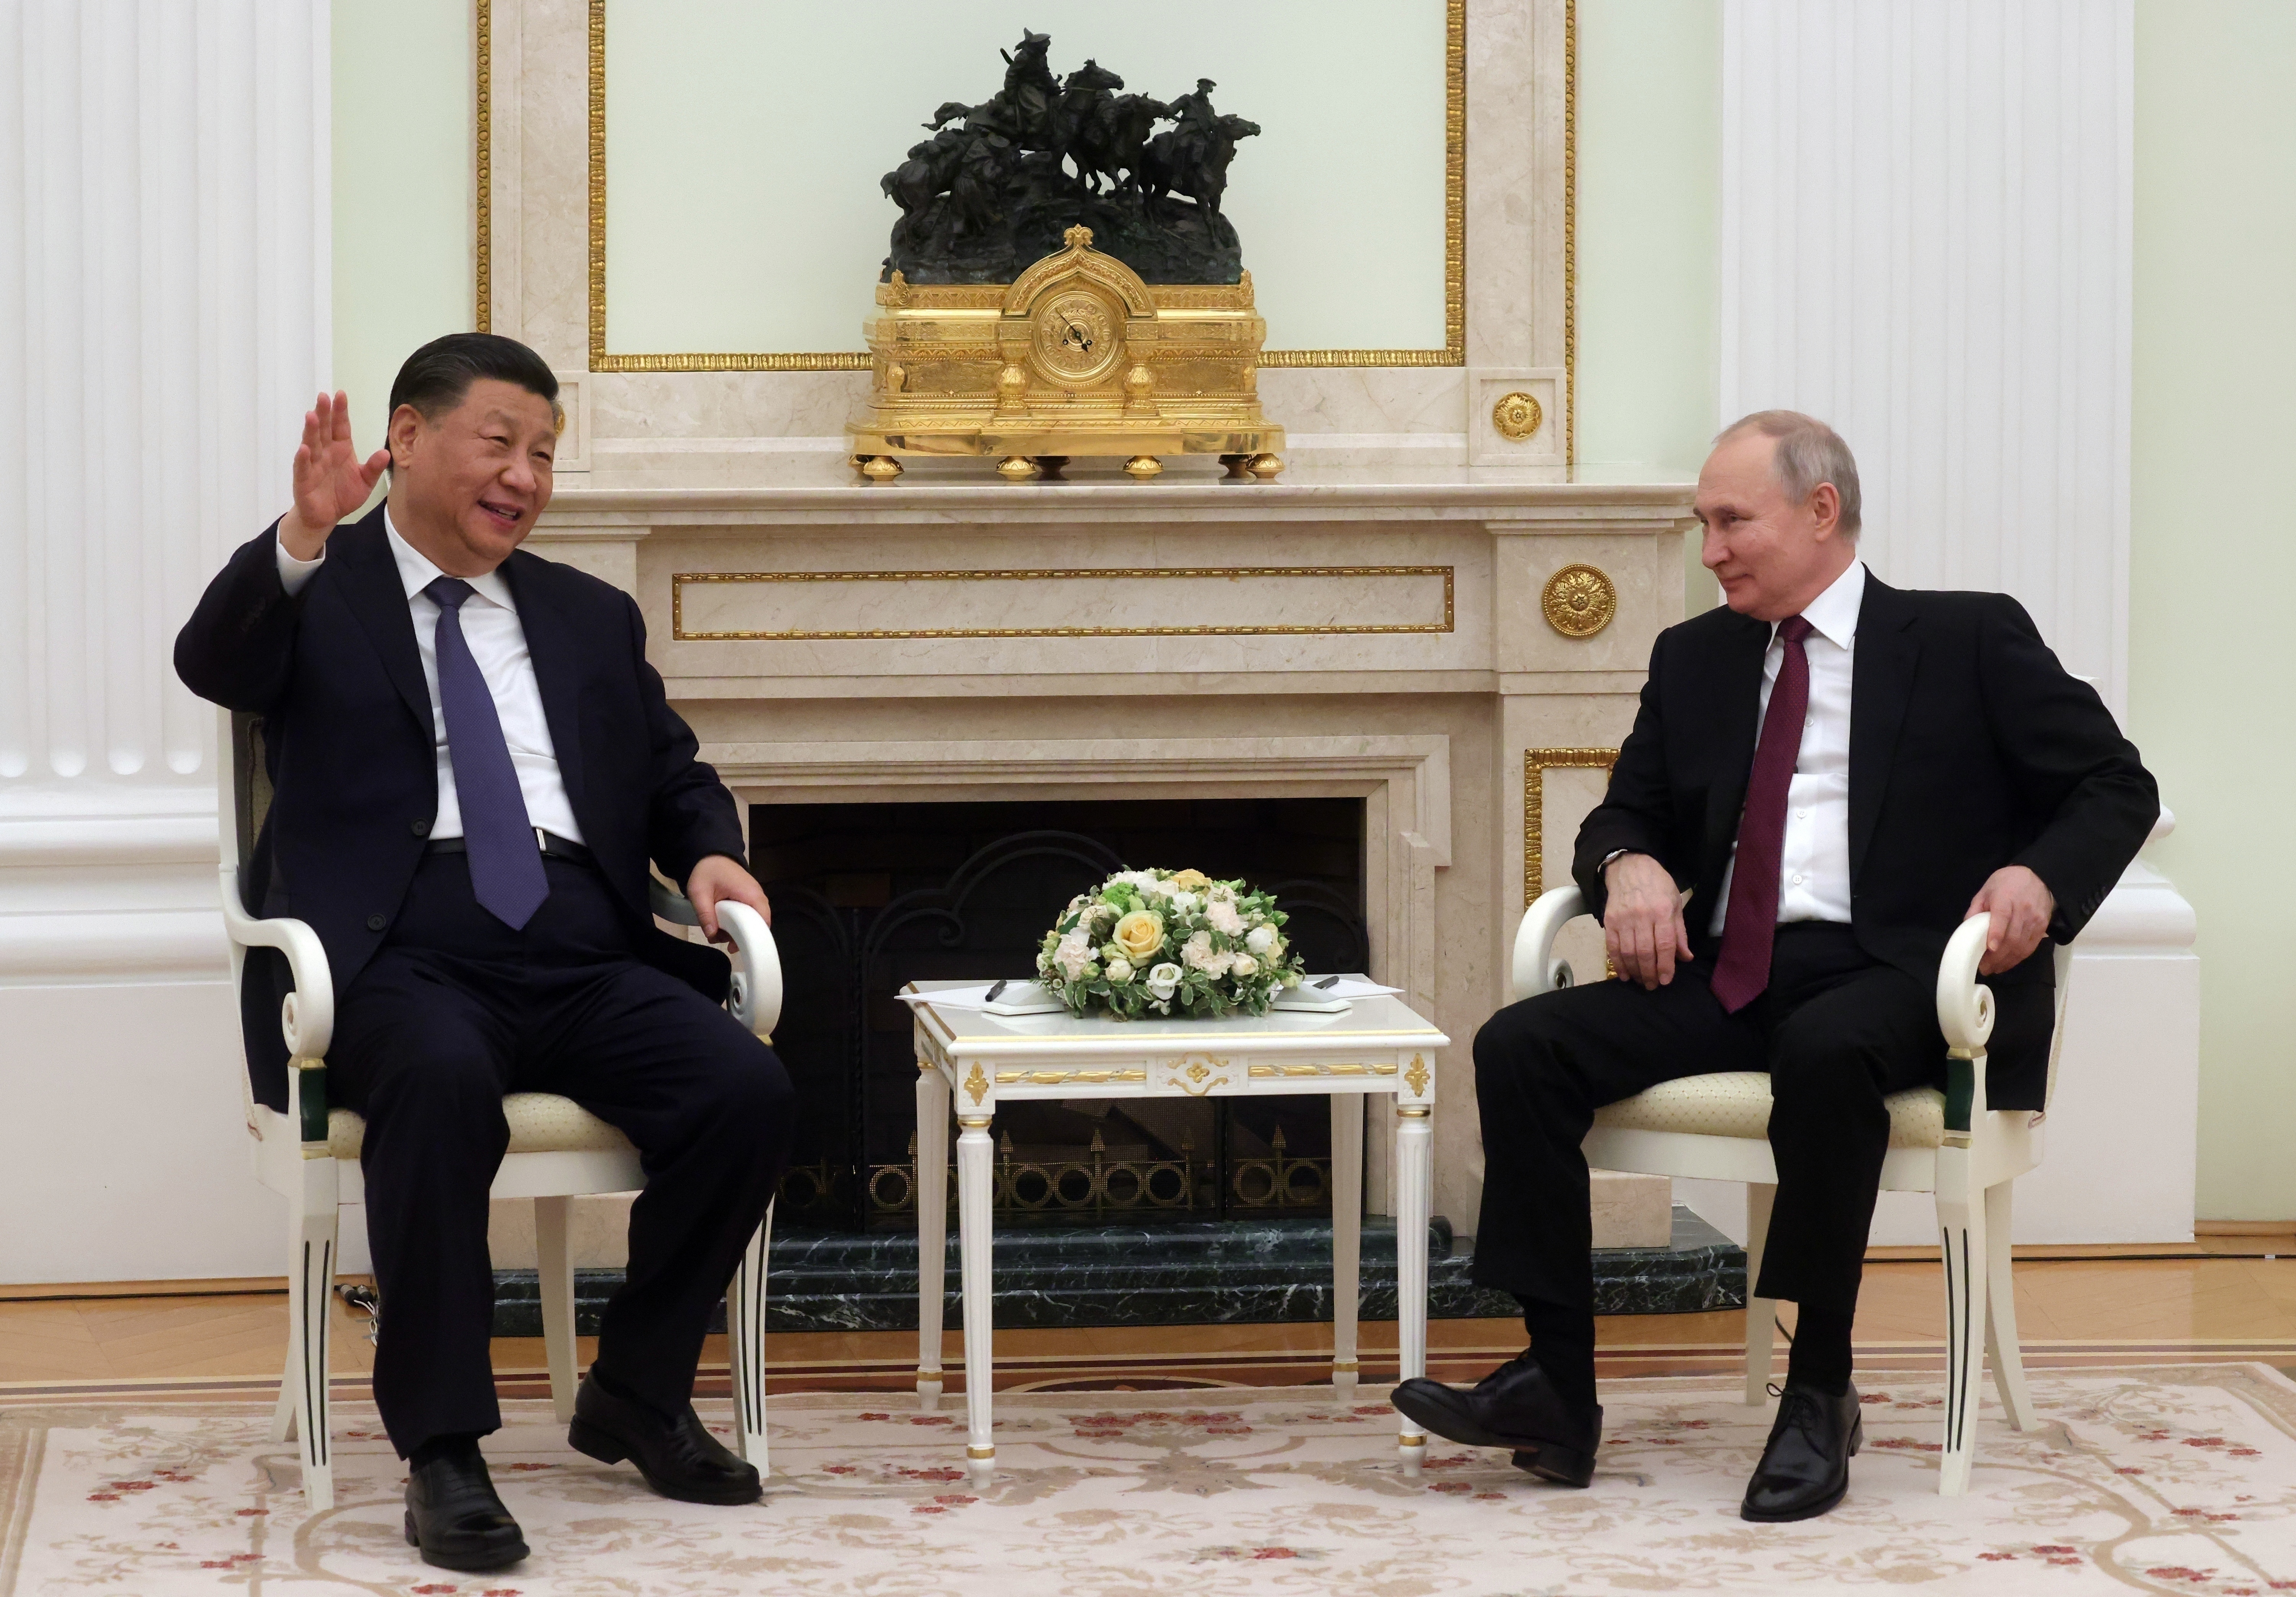 FILE - Chinese President Xi Jinping, left, gestures while speaking to Russian President Vladimir Putin during a meeting at the Kremlin in Moscow, Russia on March 20, 2023. Putin is traveling to China on Thursday on his first foreign trip as he starts his fifth term, a visit that underlines an increasingly close partnership. (Sergei Karpukhin, Sputnik, Kremlin Pool Photo via AP, File)